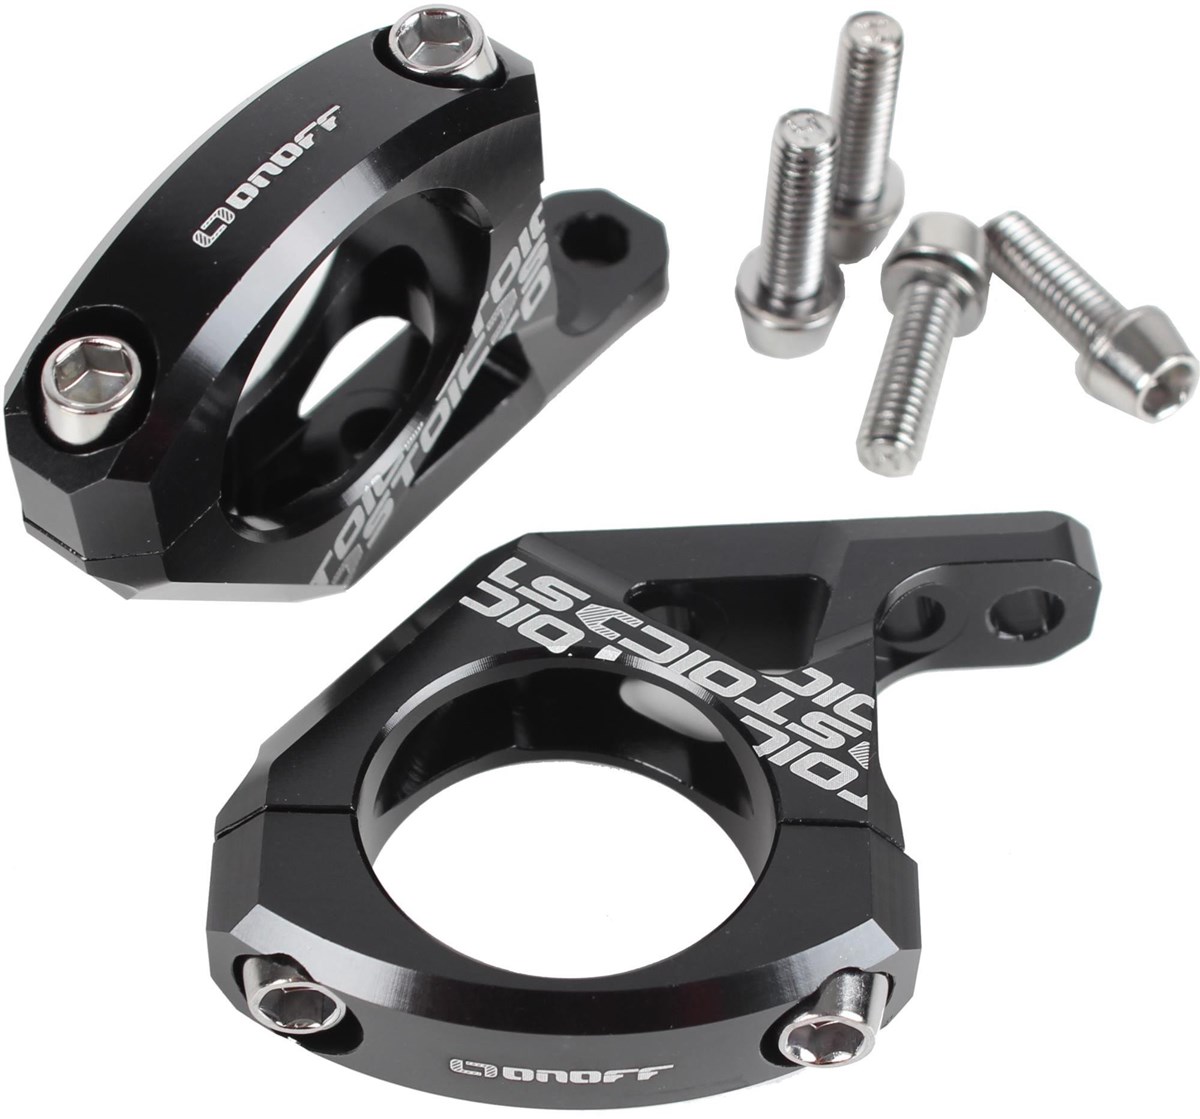 Mondraker OnOff Stoic DH Integrated Stem